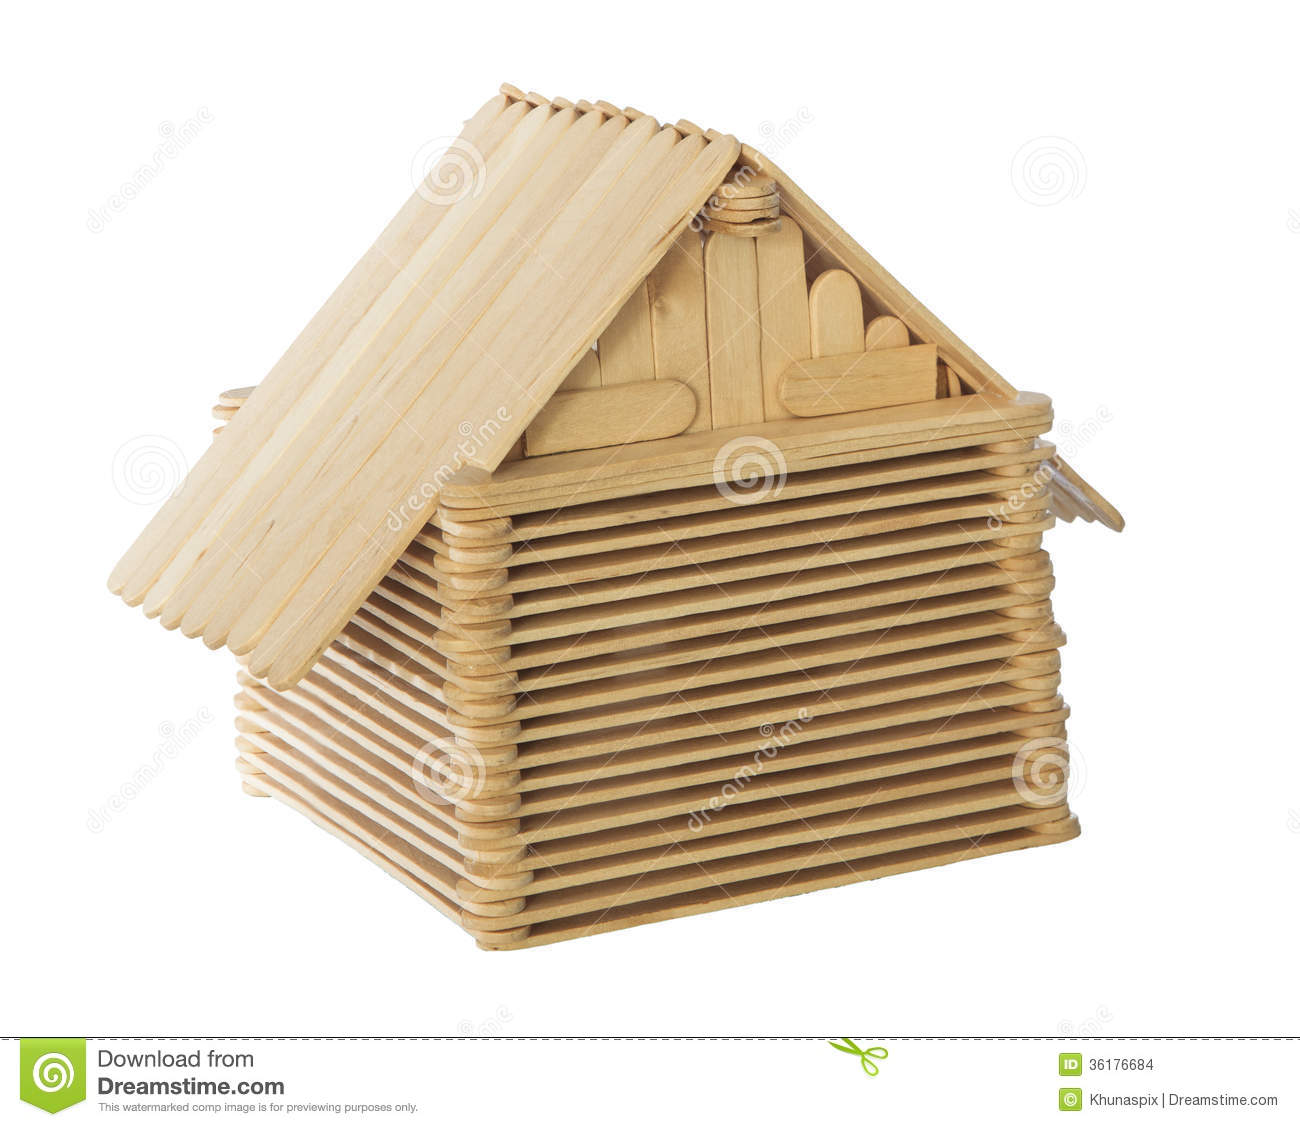 Stick House Clipart Wood Stick Home Model Isolated